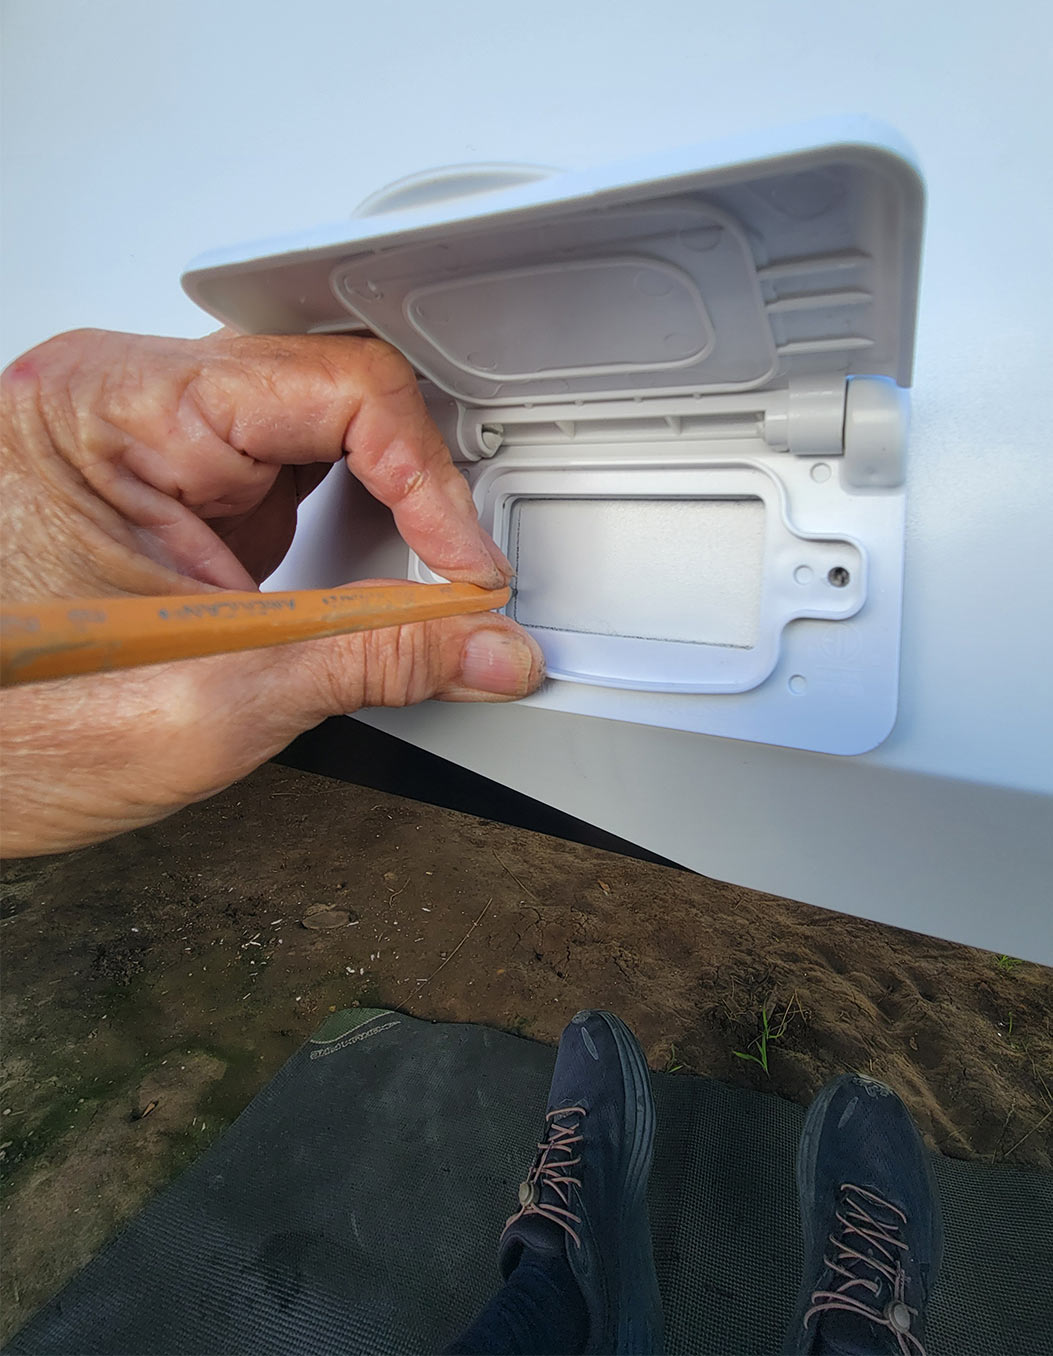 the cover plate of the new weatherproof outlet is used to create a template area to cut on the lower metal skirt of an RV